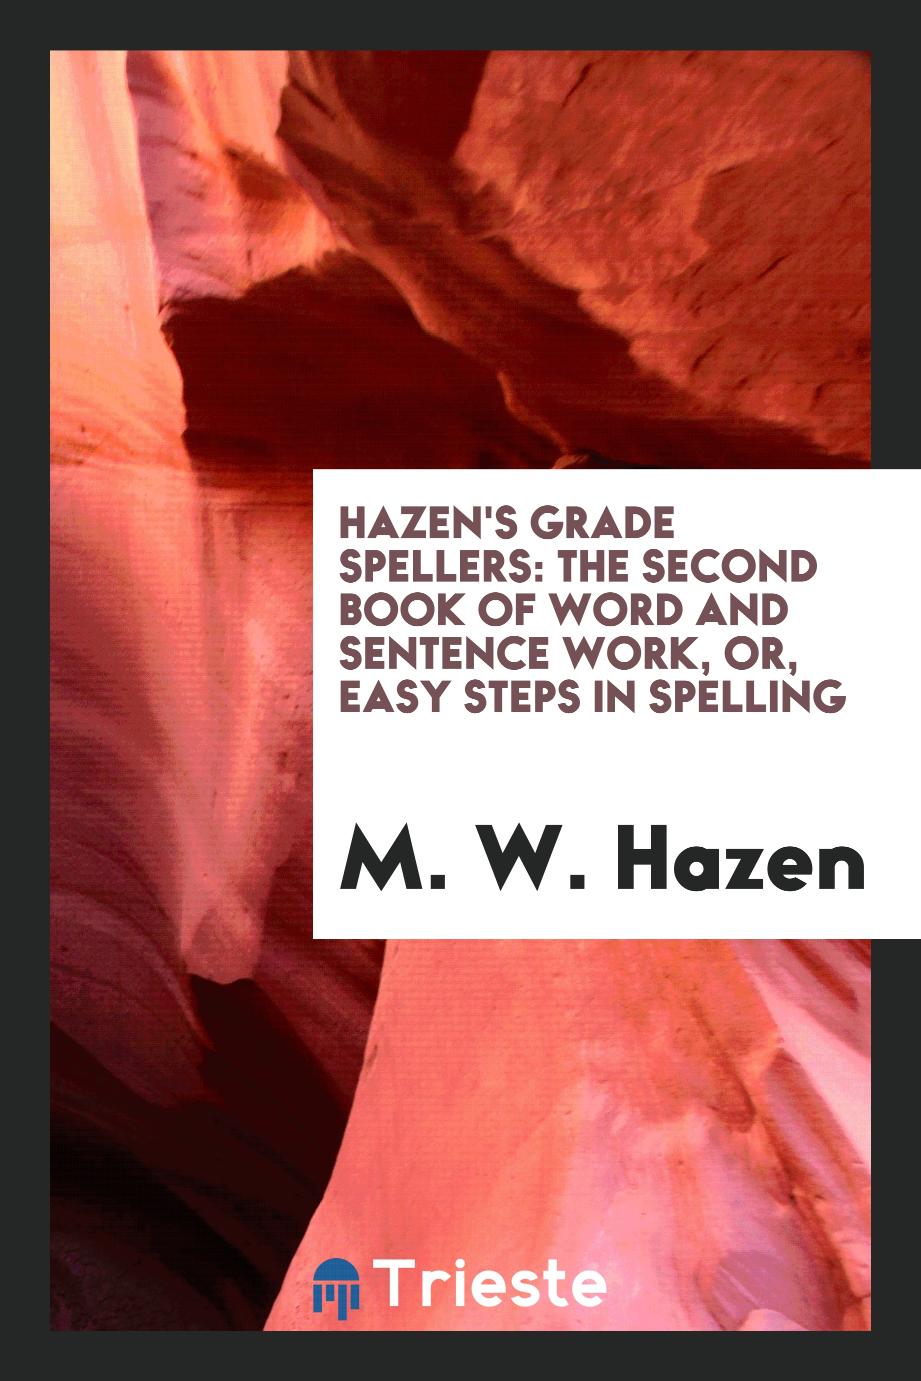 Hazen's Grade Spellers: The Second Book of Word and Sentence Work, or, Easy Steps in Spelling